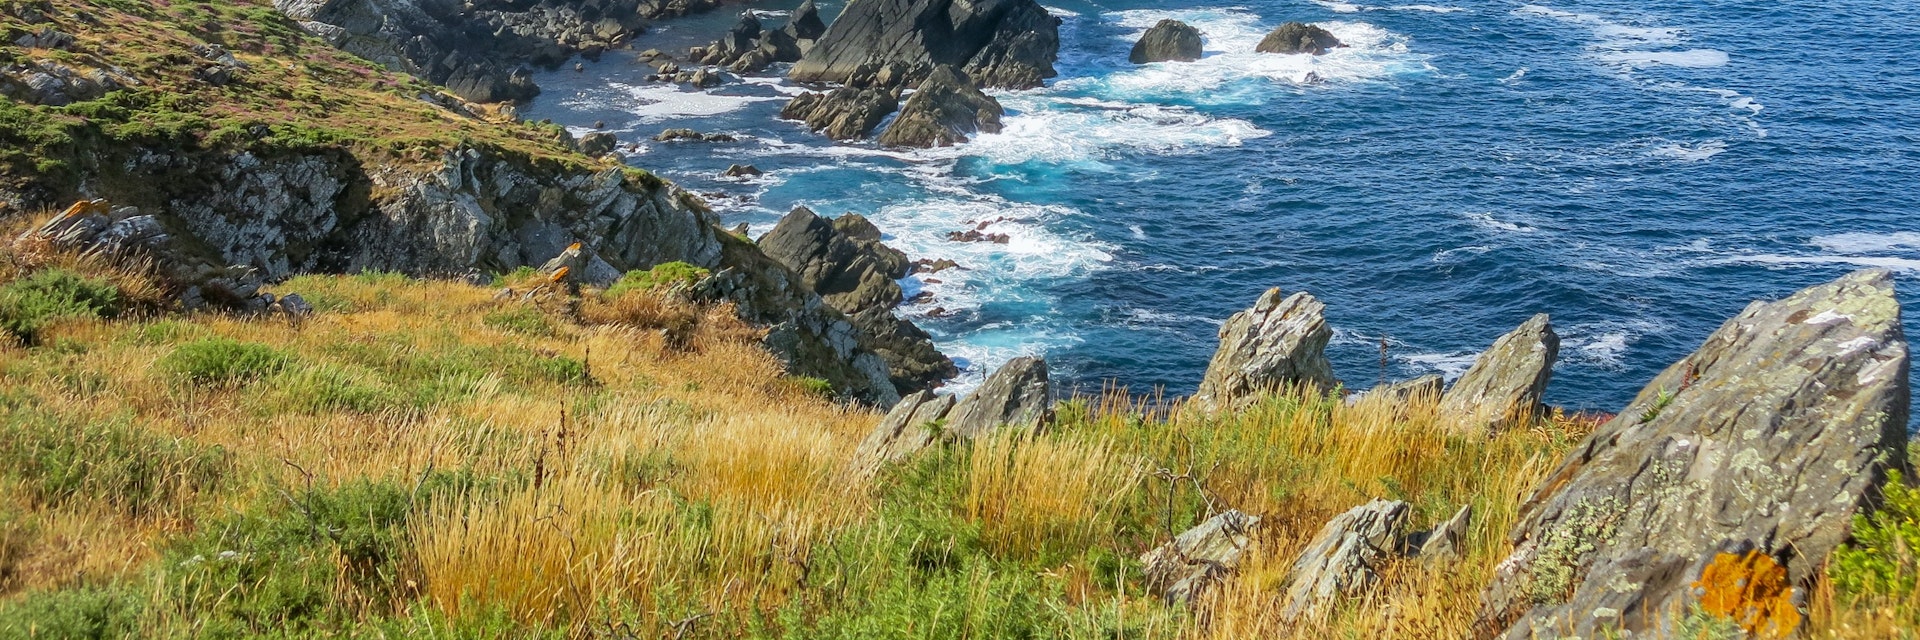 Scenic cliffs view in San Xiao, small village near Cedeira, Galicia, northern Spain; Shutterstock ID 485677099; Your name (First / Last): Ben Buckner; GL account no.: 65050; Netsuite department name: Client Services; Full Product or Project name including edition: Spain OTBT Partner